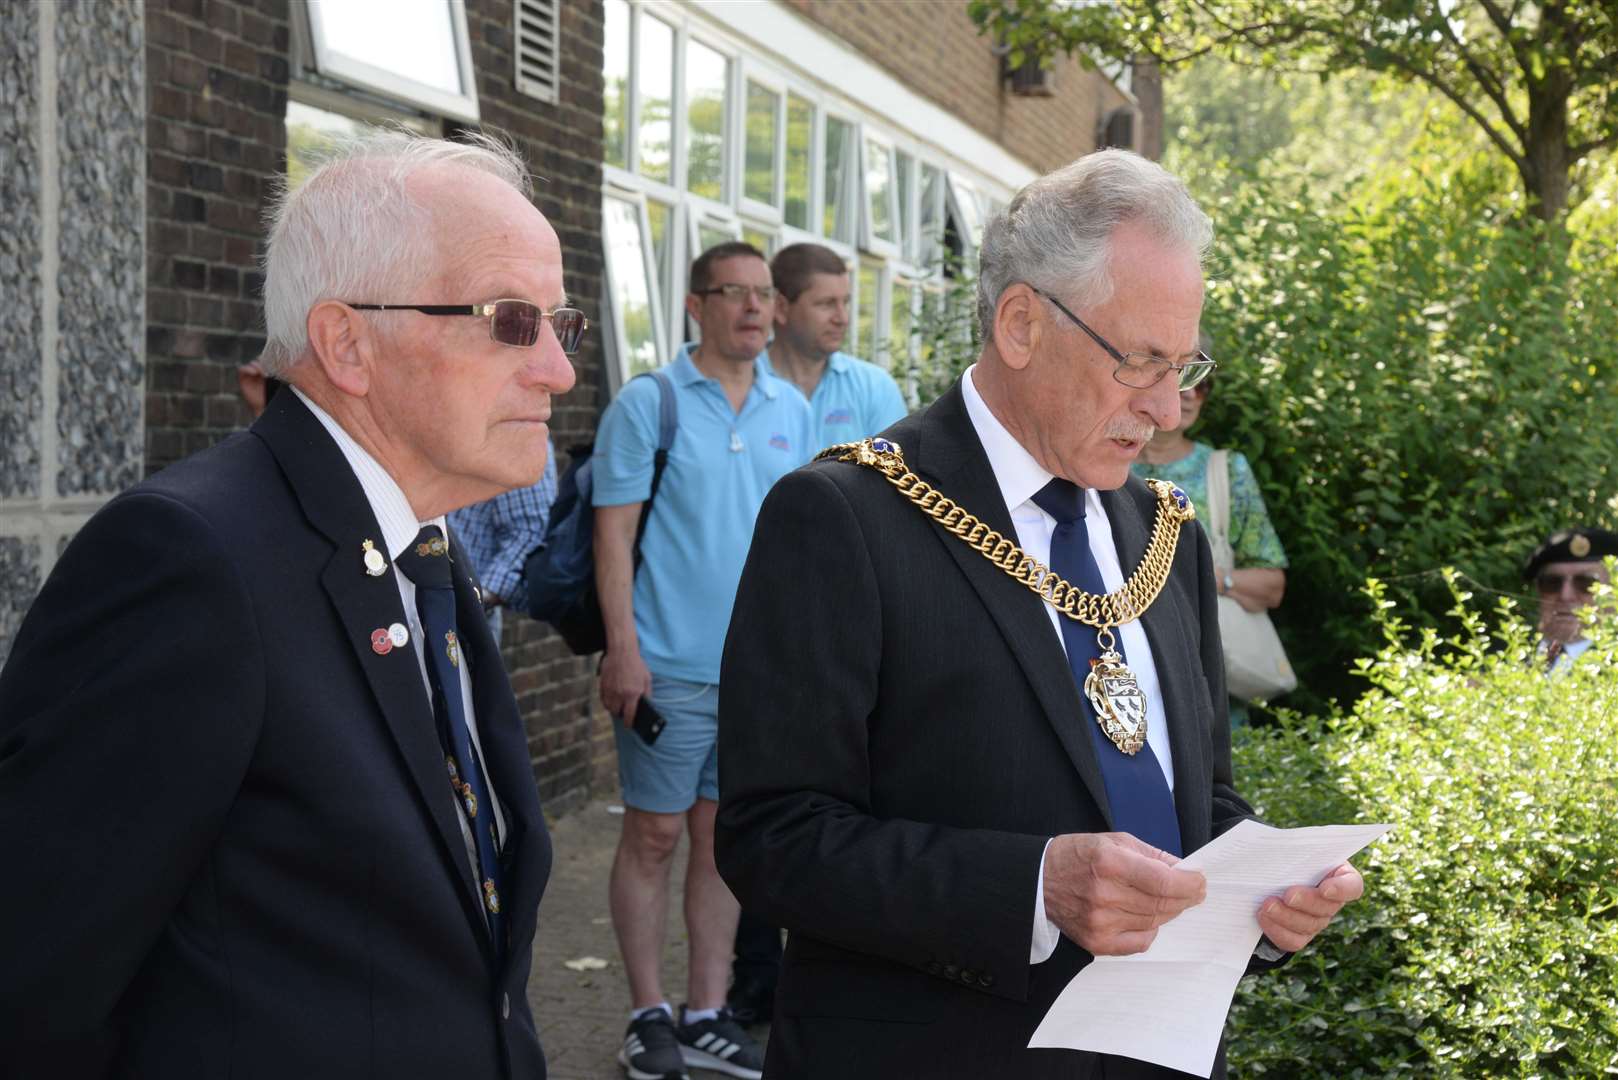 Gerry Ferrett with Lord Mayor Cllr Terry Westgate speaking after the Armed Forces Day flag was raised at Canterbury Fire Station on Saturday. Picture: Chris Davey. (13154131)